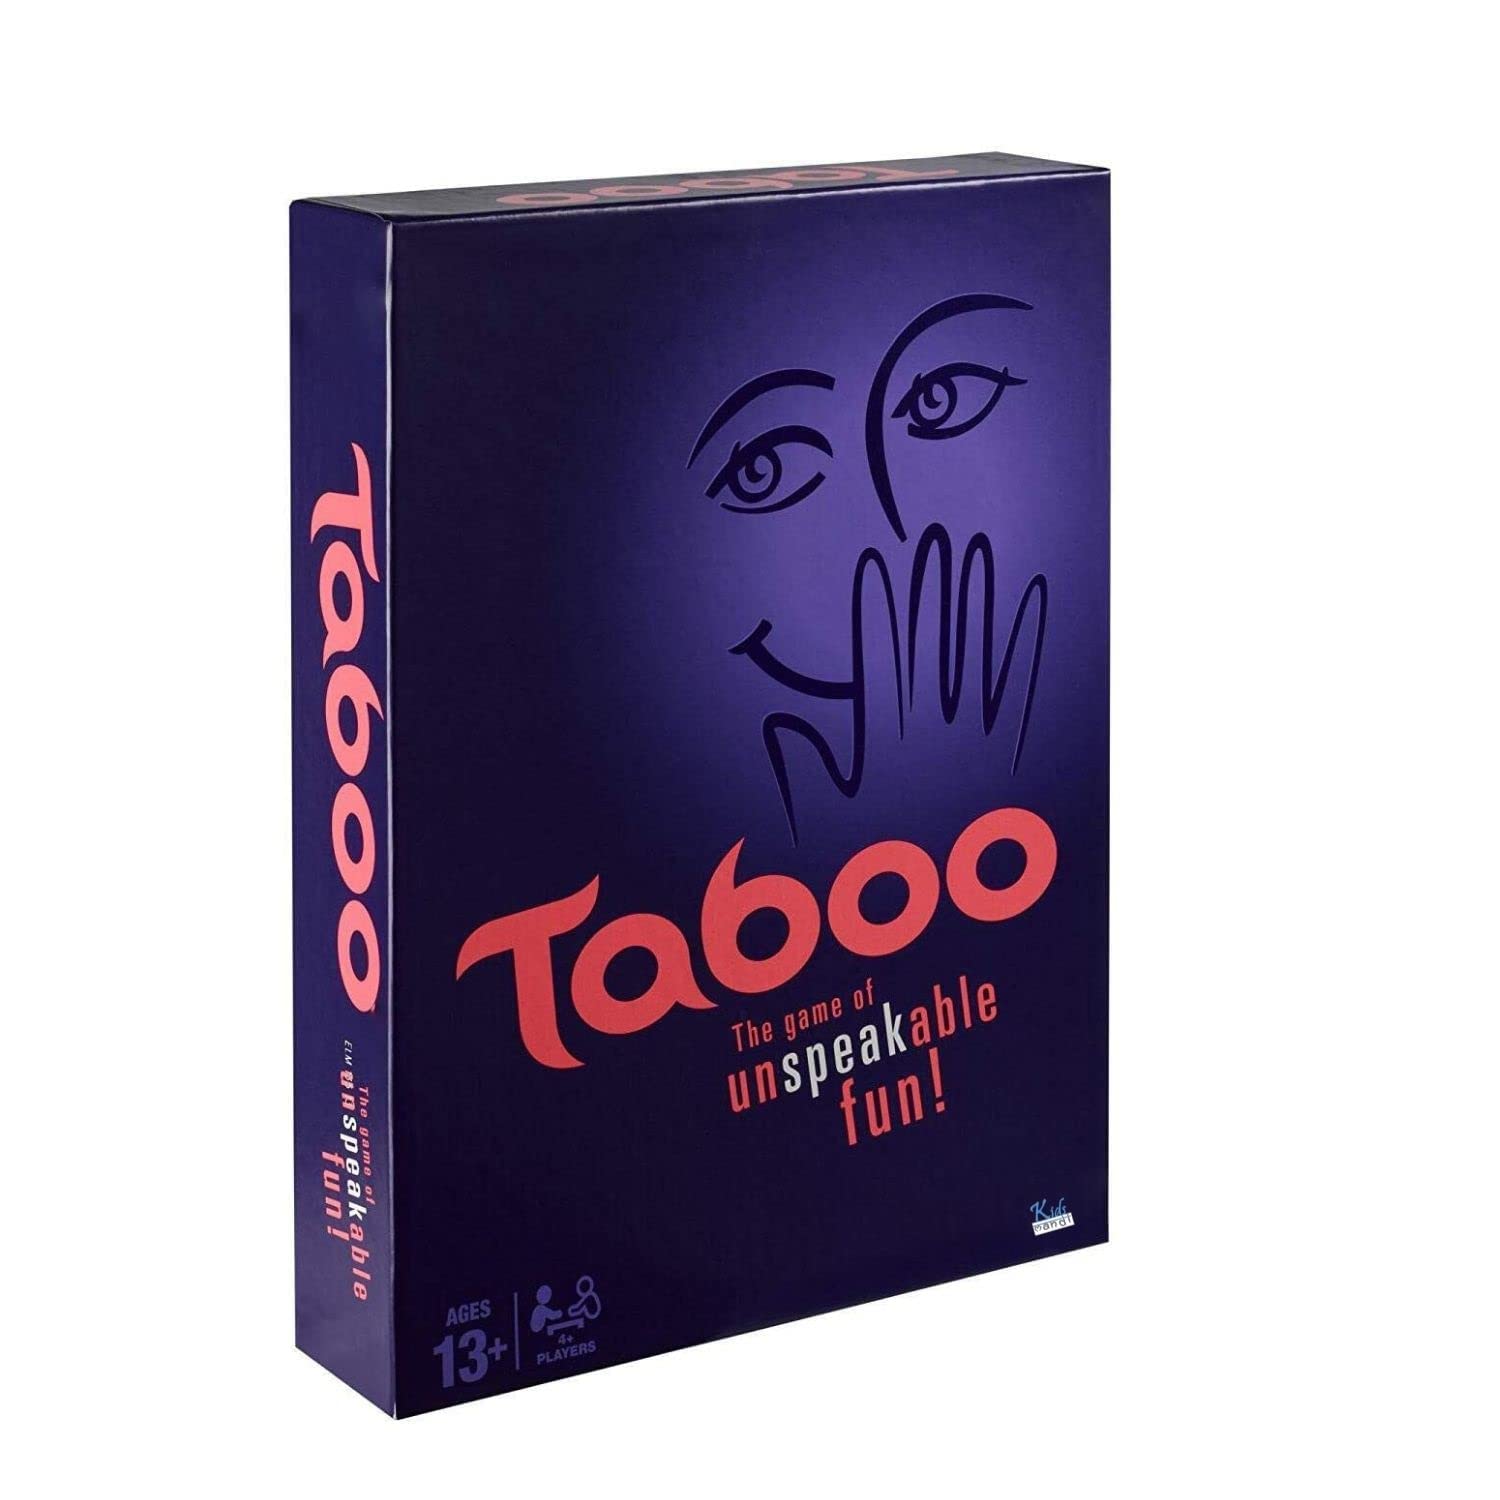 KIDS MANDI taboo-board-game featuring fun and educational gameplay opportunities for children.